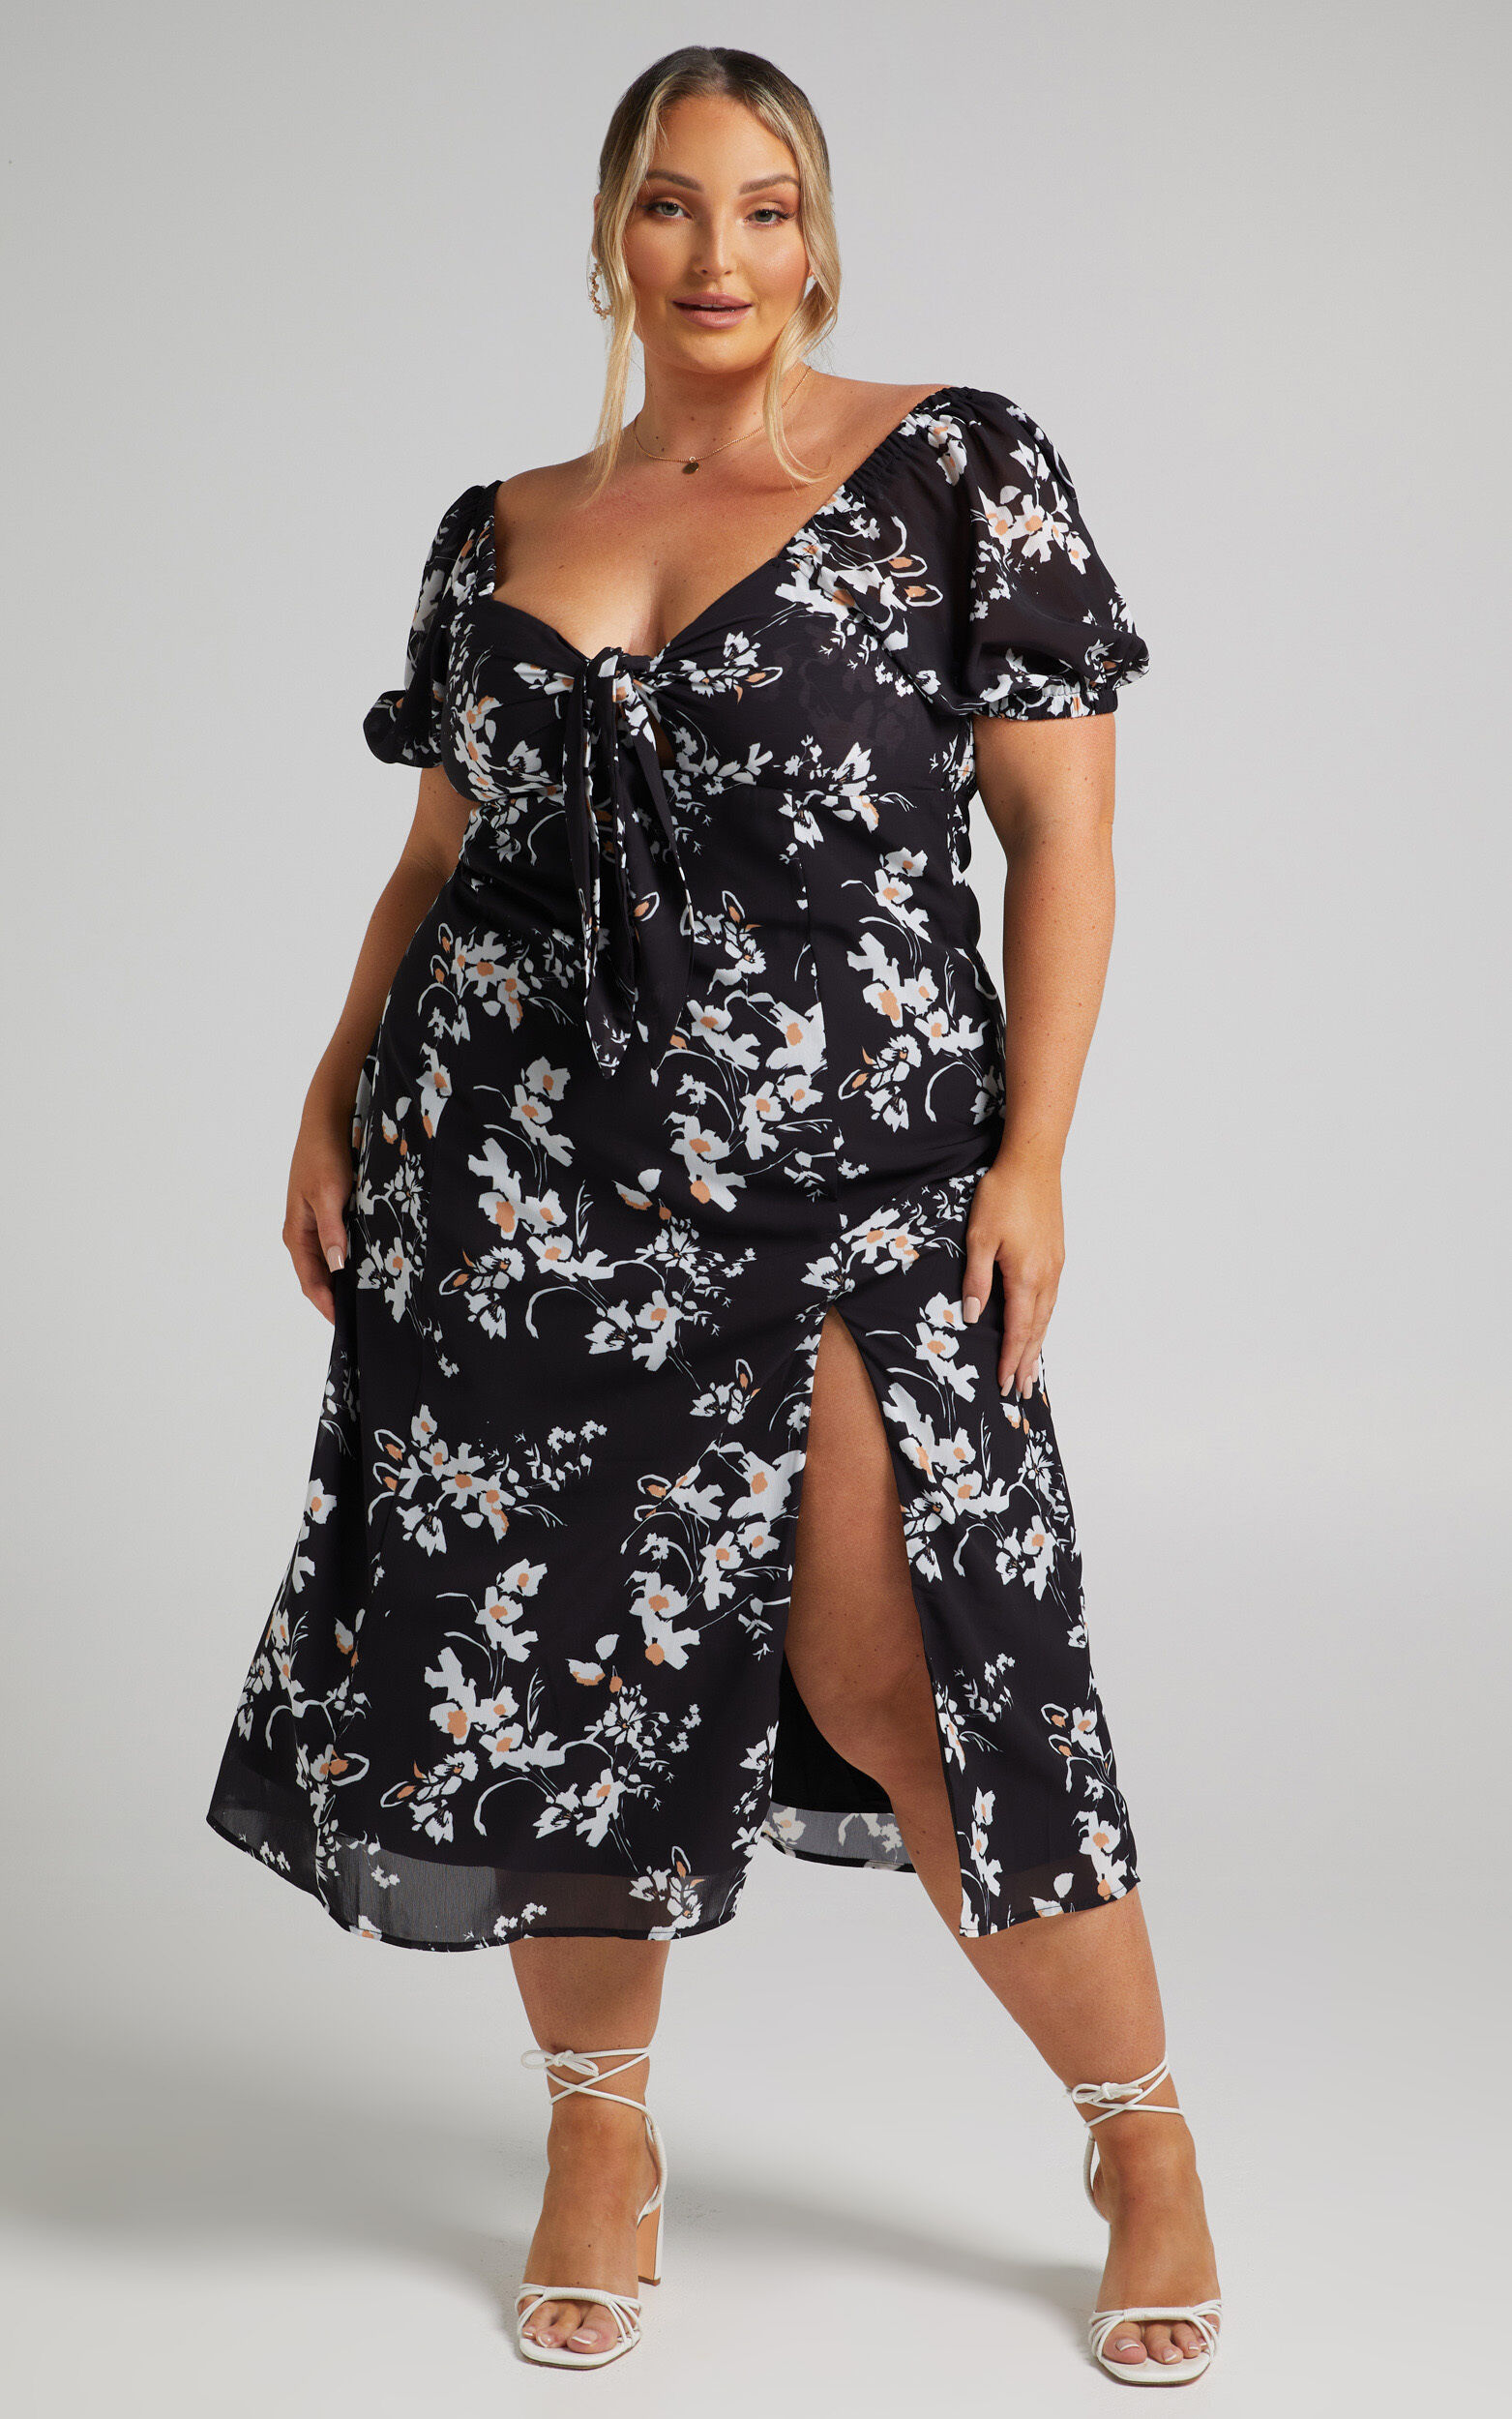 Cyia Tie Bust Midi Dress with Leg Slit in Black Floral - 04, BLK2, super-hi-res image number null